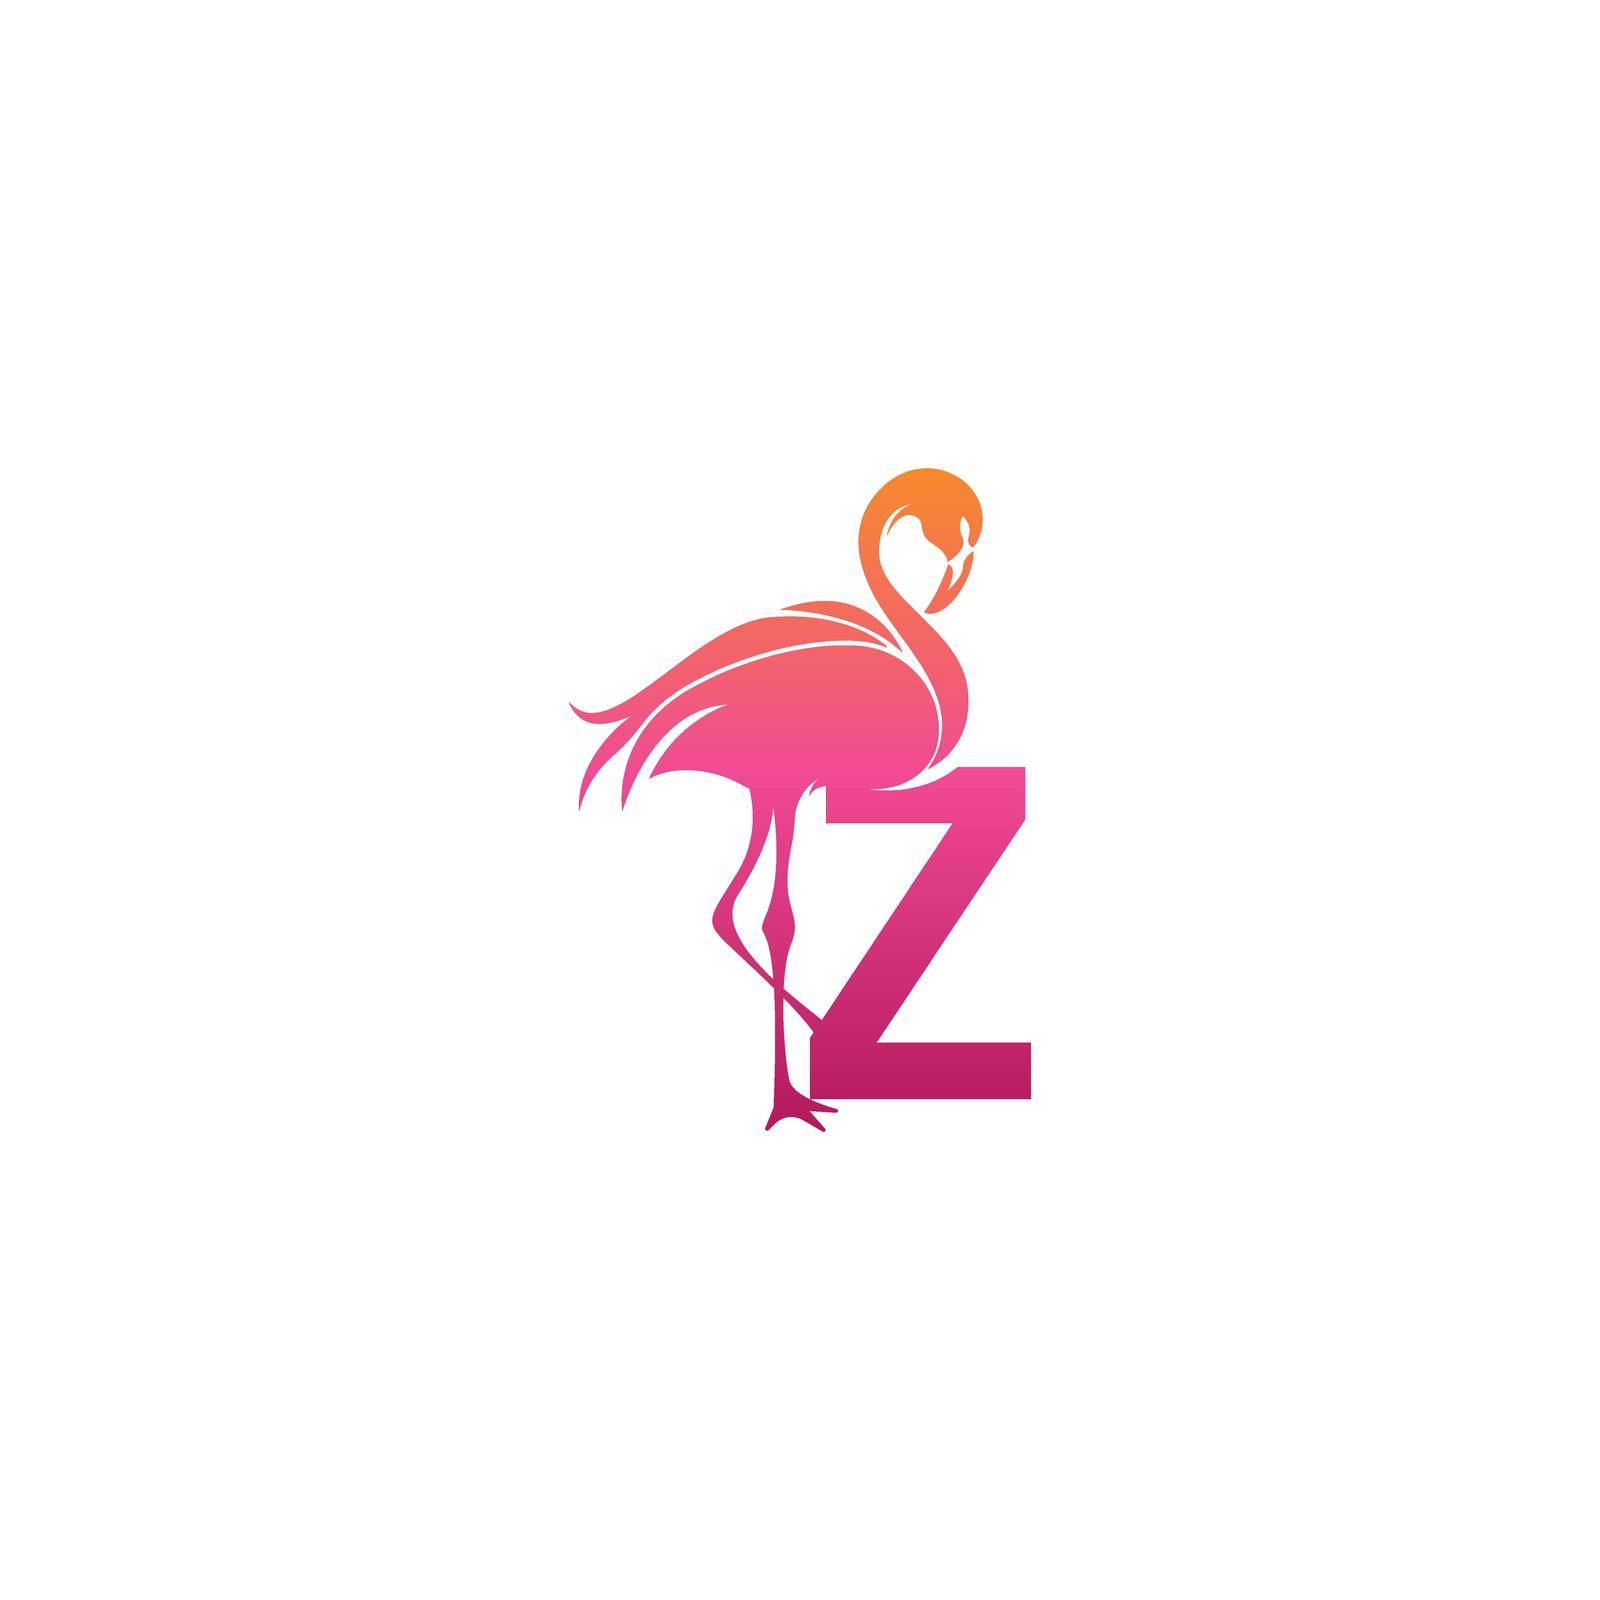 Flamingo bird icon with letter Z Logo design vector by bellaxbudhong3